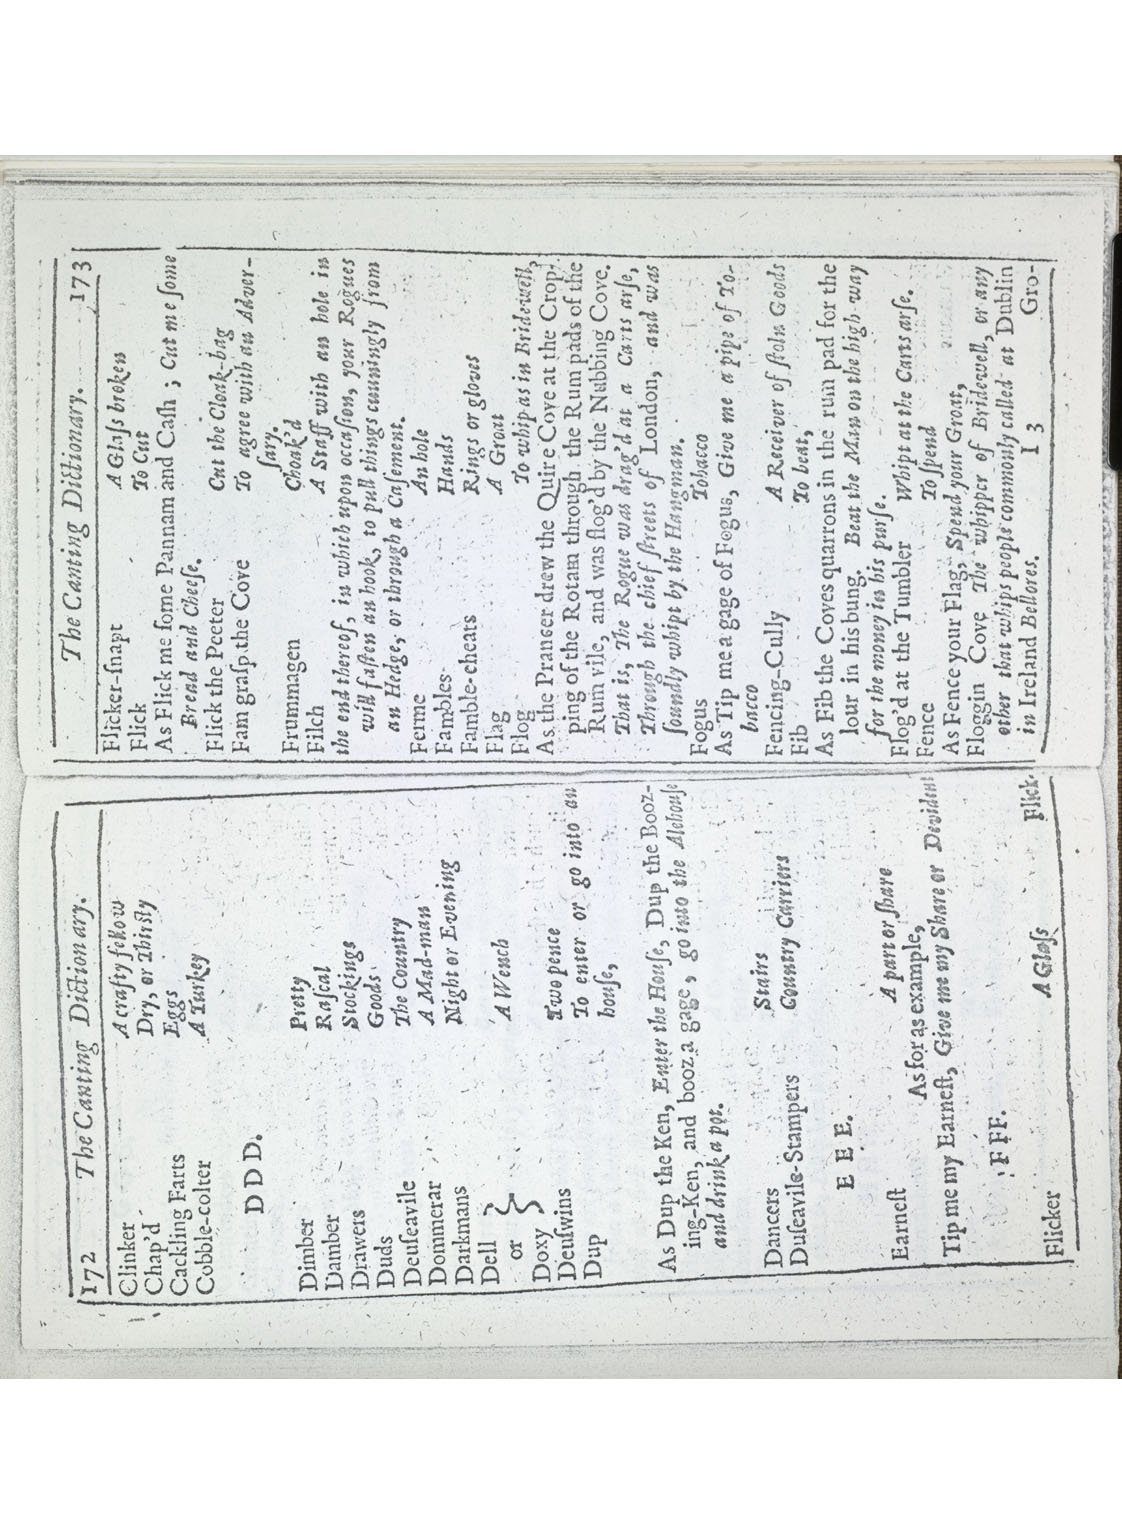 image of Canting Academy dictionary